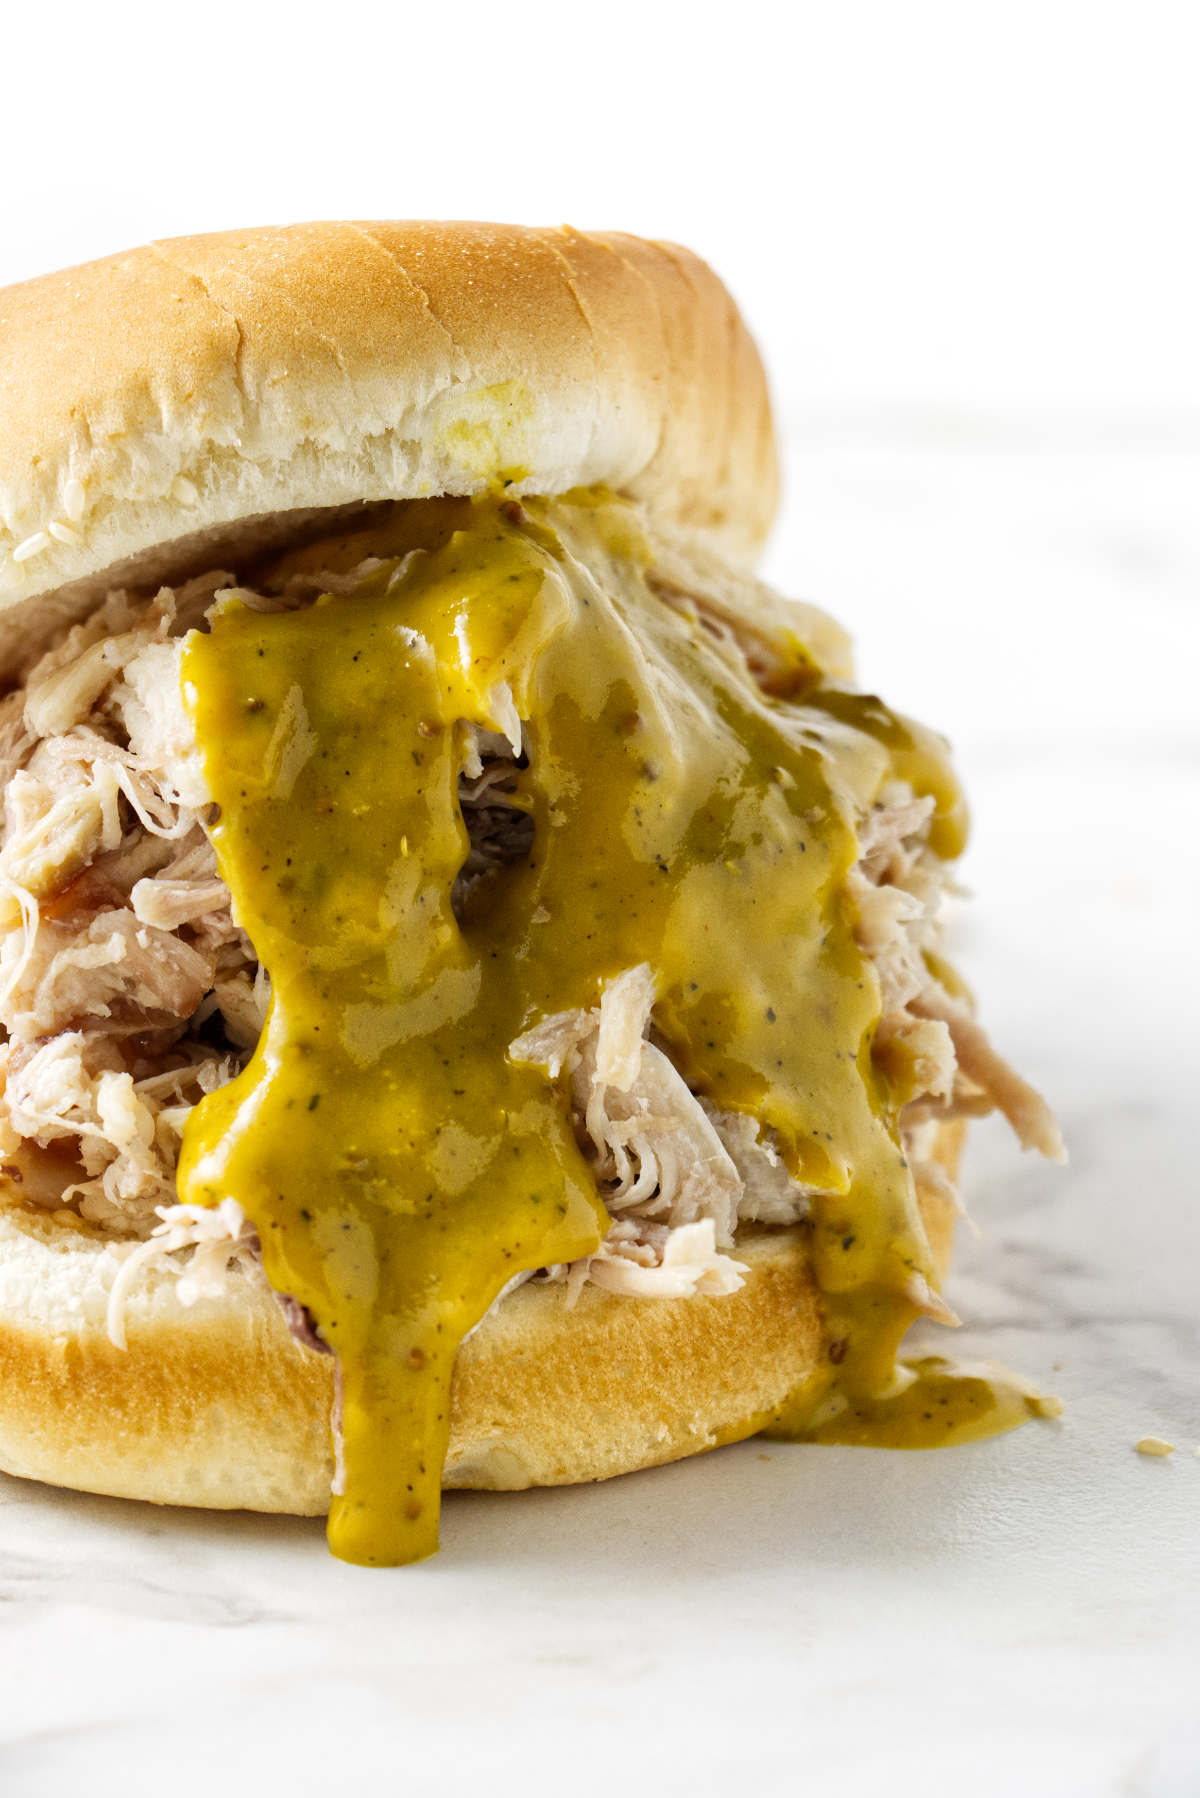 A shredded chicken sandwich with gold bbq sauce.